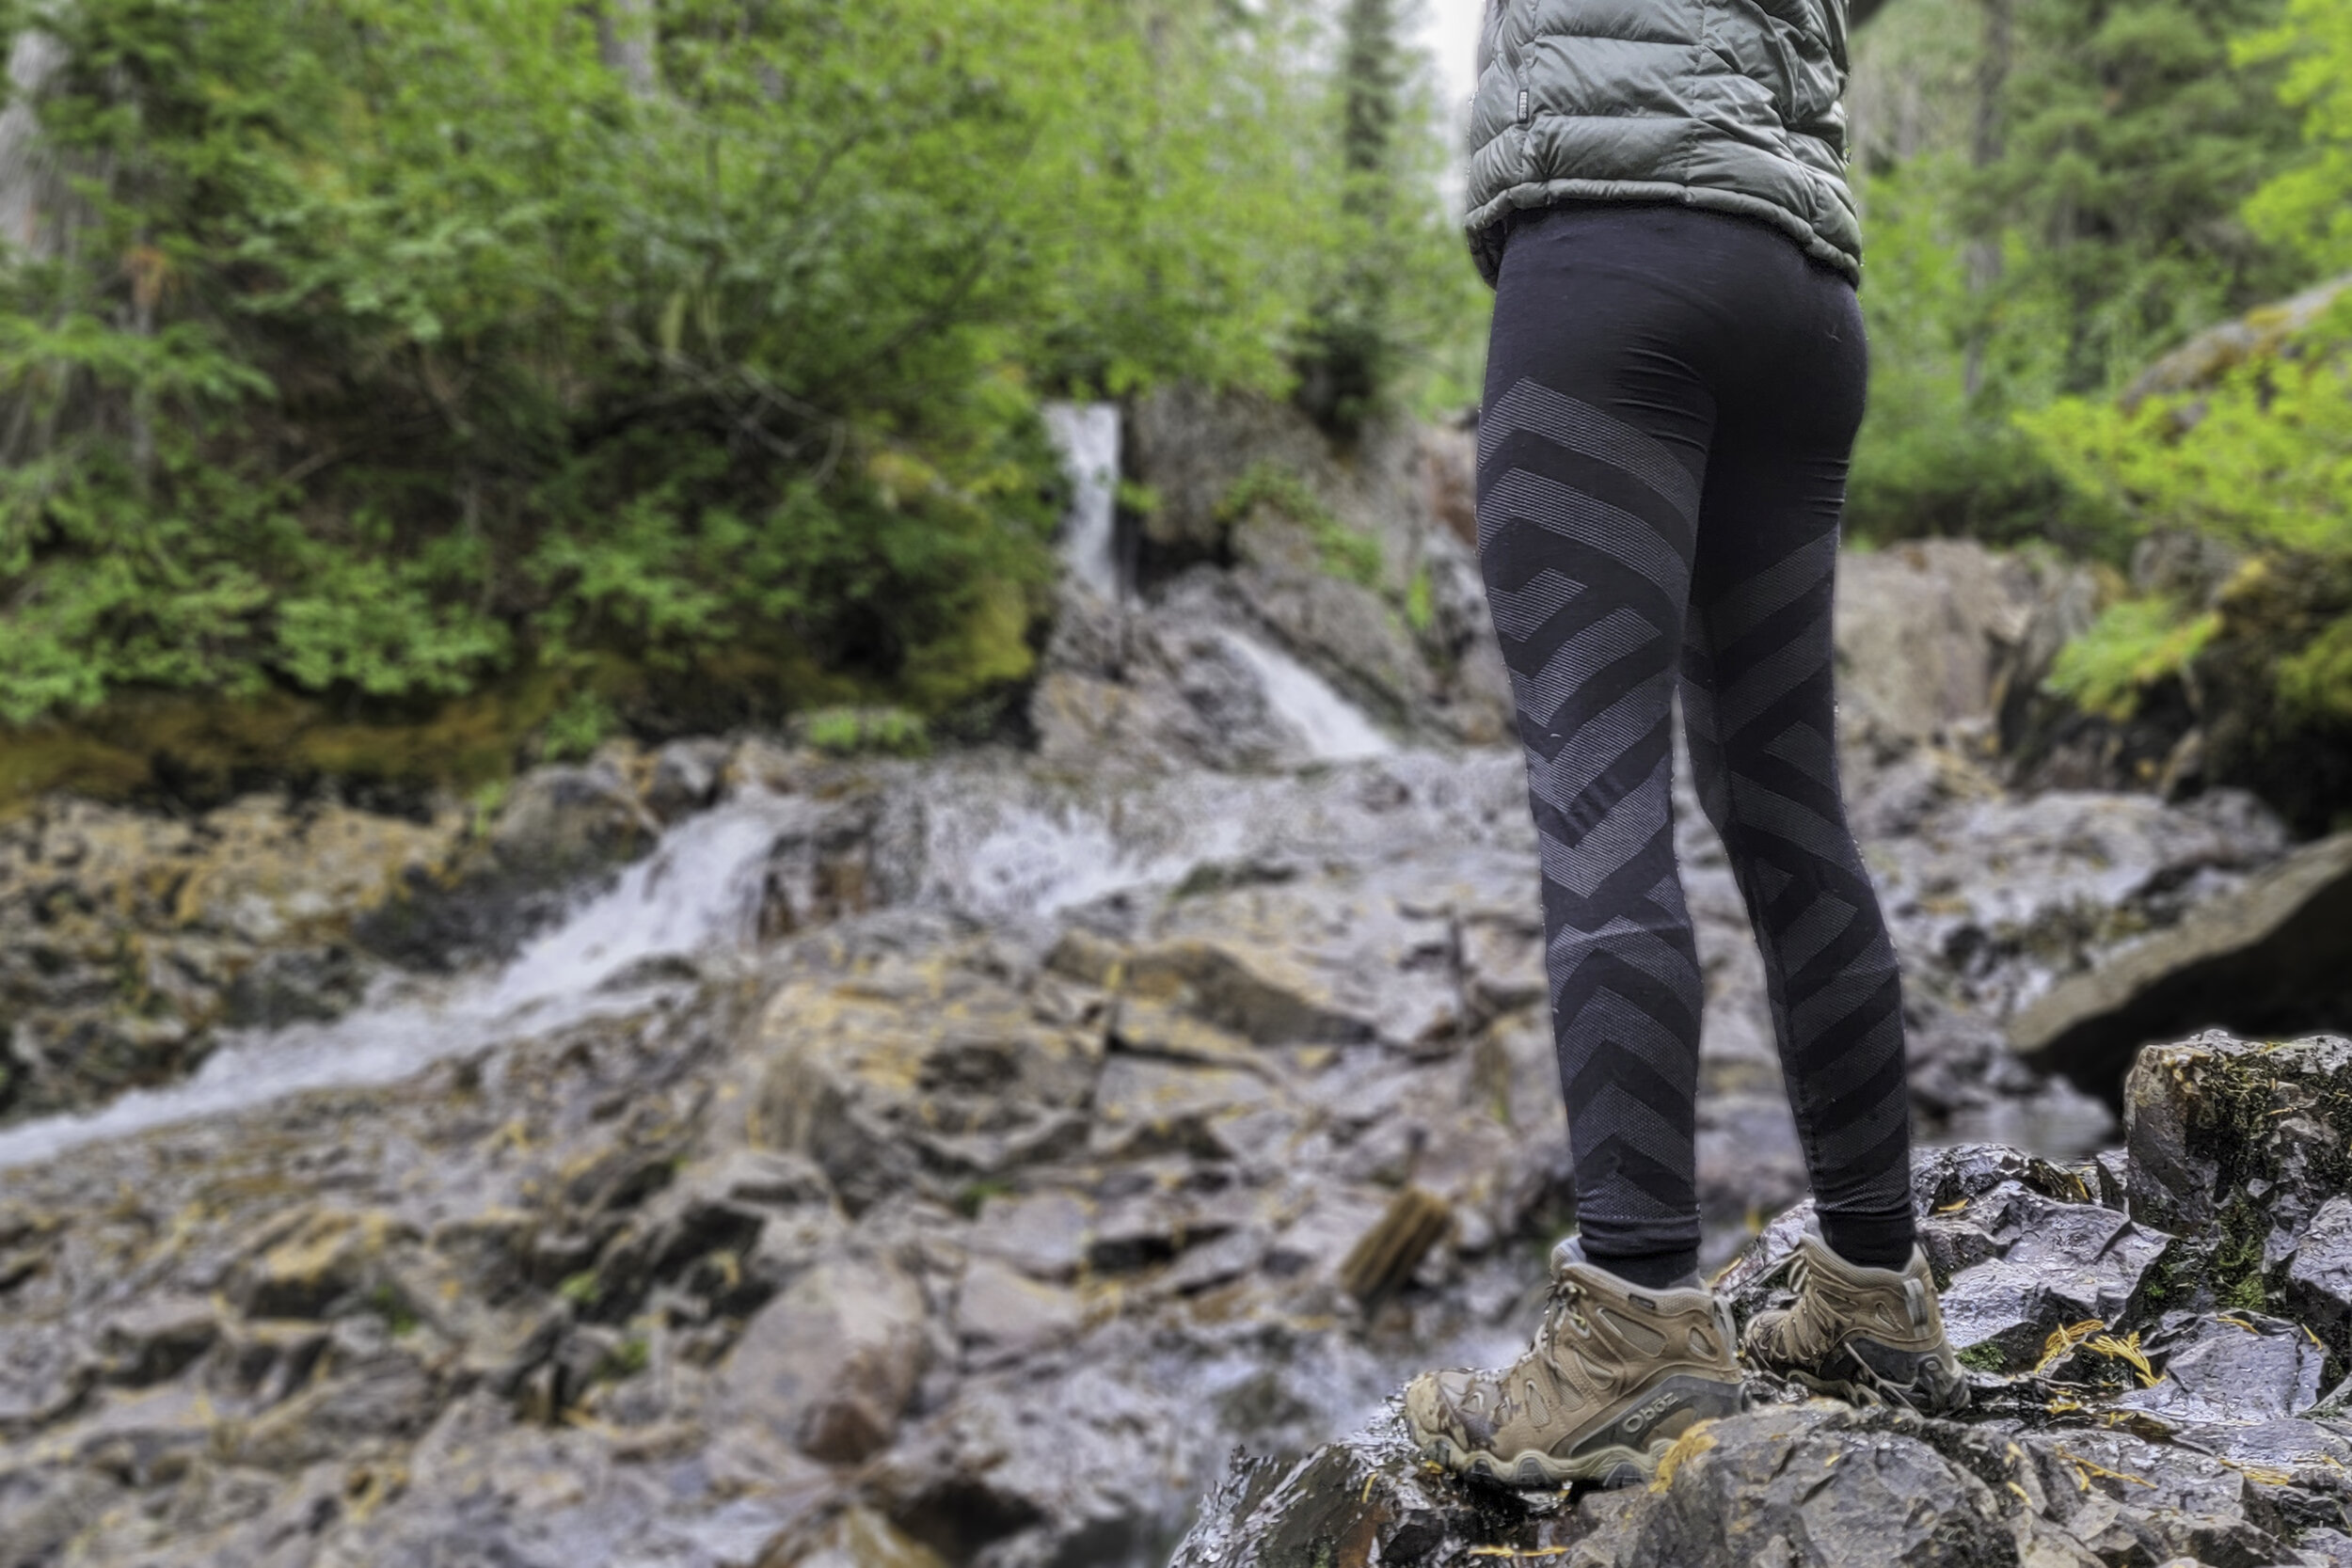 Winter Hiking Clothes for Women: Base Layers to Outer Layers